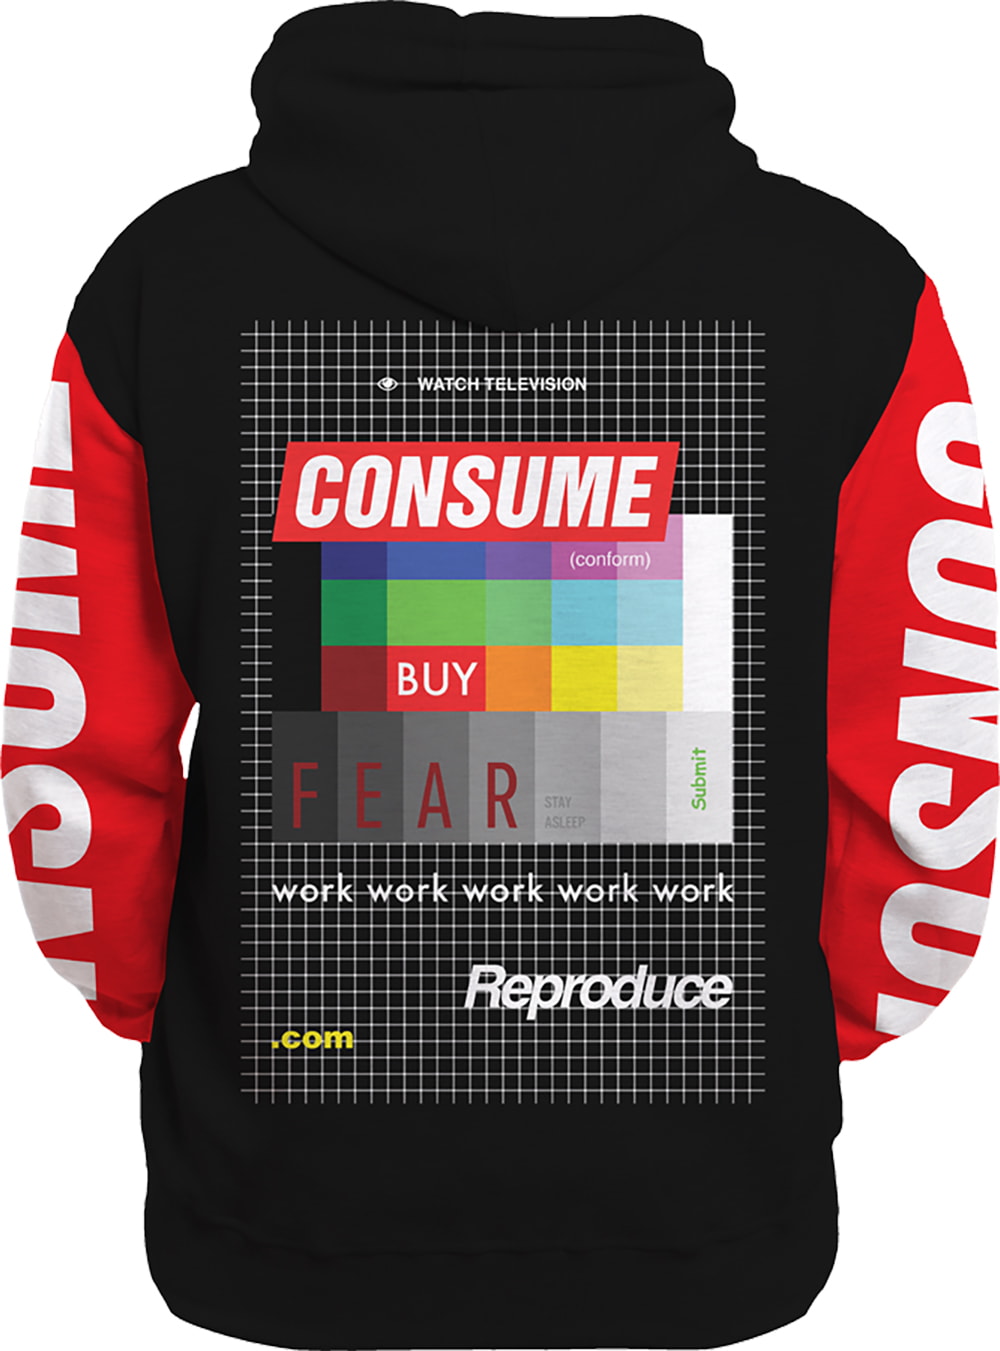 Consume All Black And Red 3D Hoodie, T-Shirt, Zip Hoodie, Sweatshirt For Men and Women